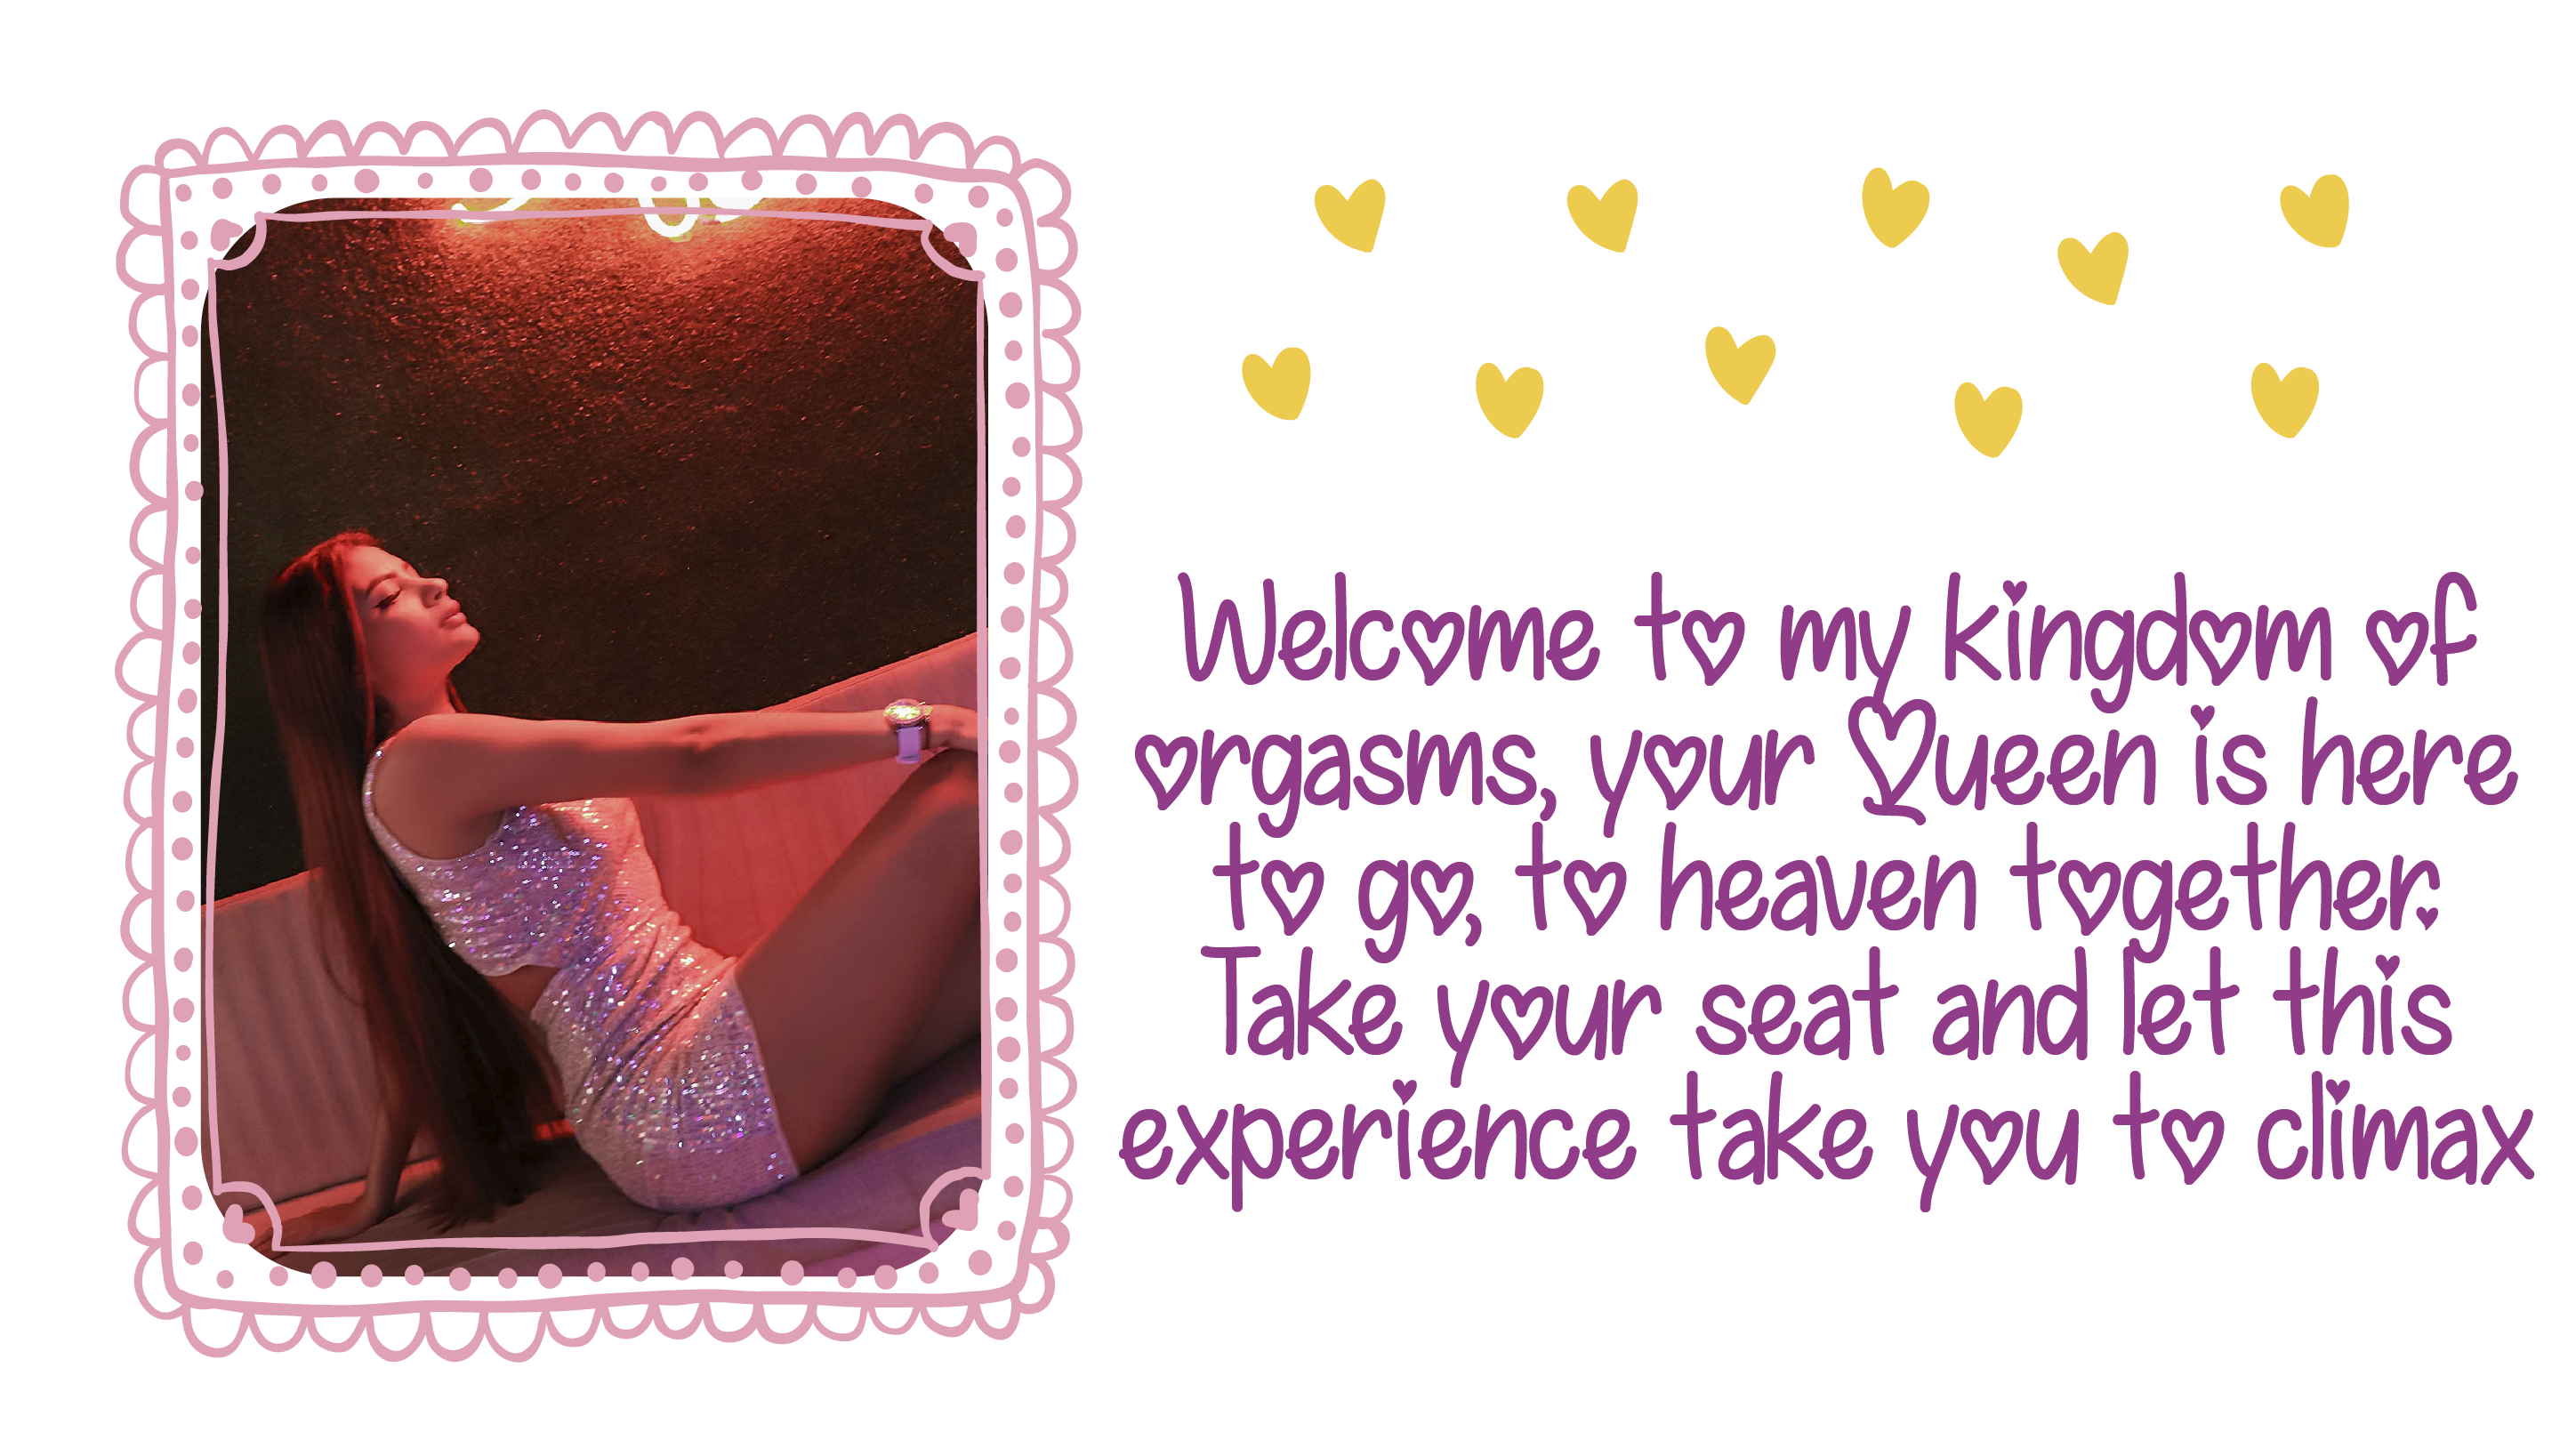 PaulinRoss Welcome to the dream of fantasies, let's go to orgasm heaven together♥ image: 6